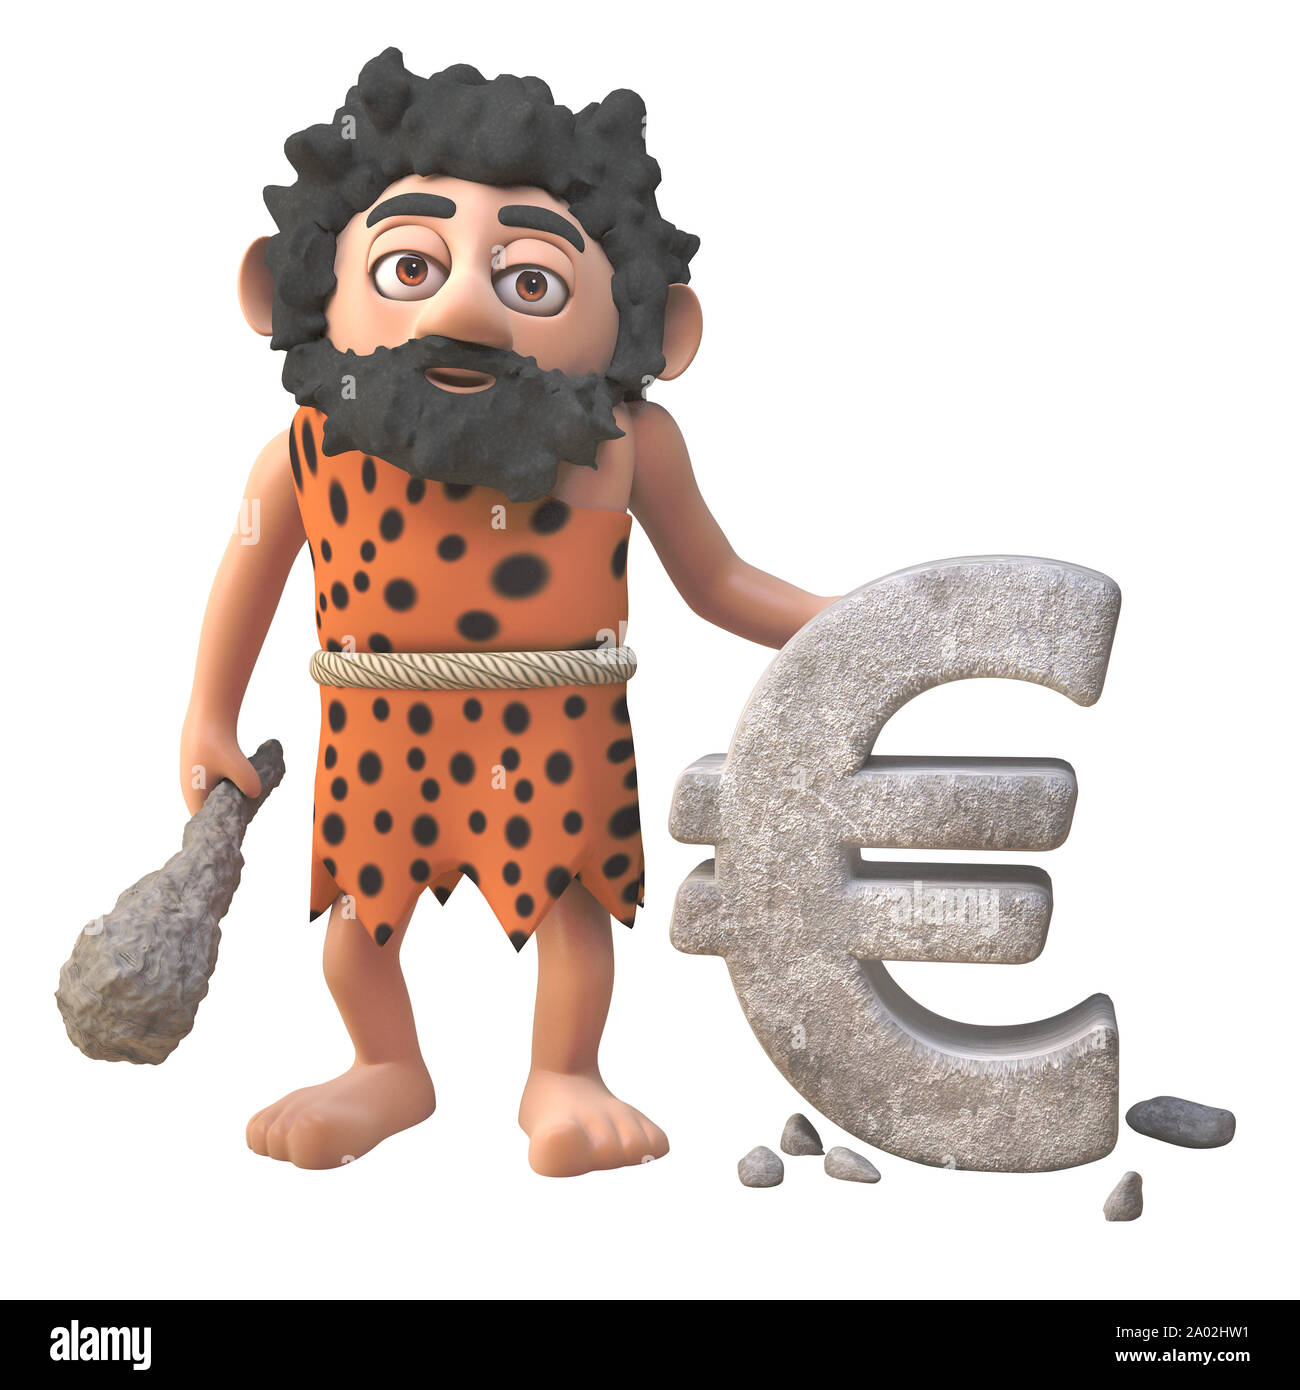 Funny 3d cartoon prehistoric caveman character carving a Euro currency symbol in rock, 3d illustration render Stock Photo